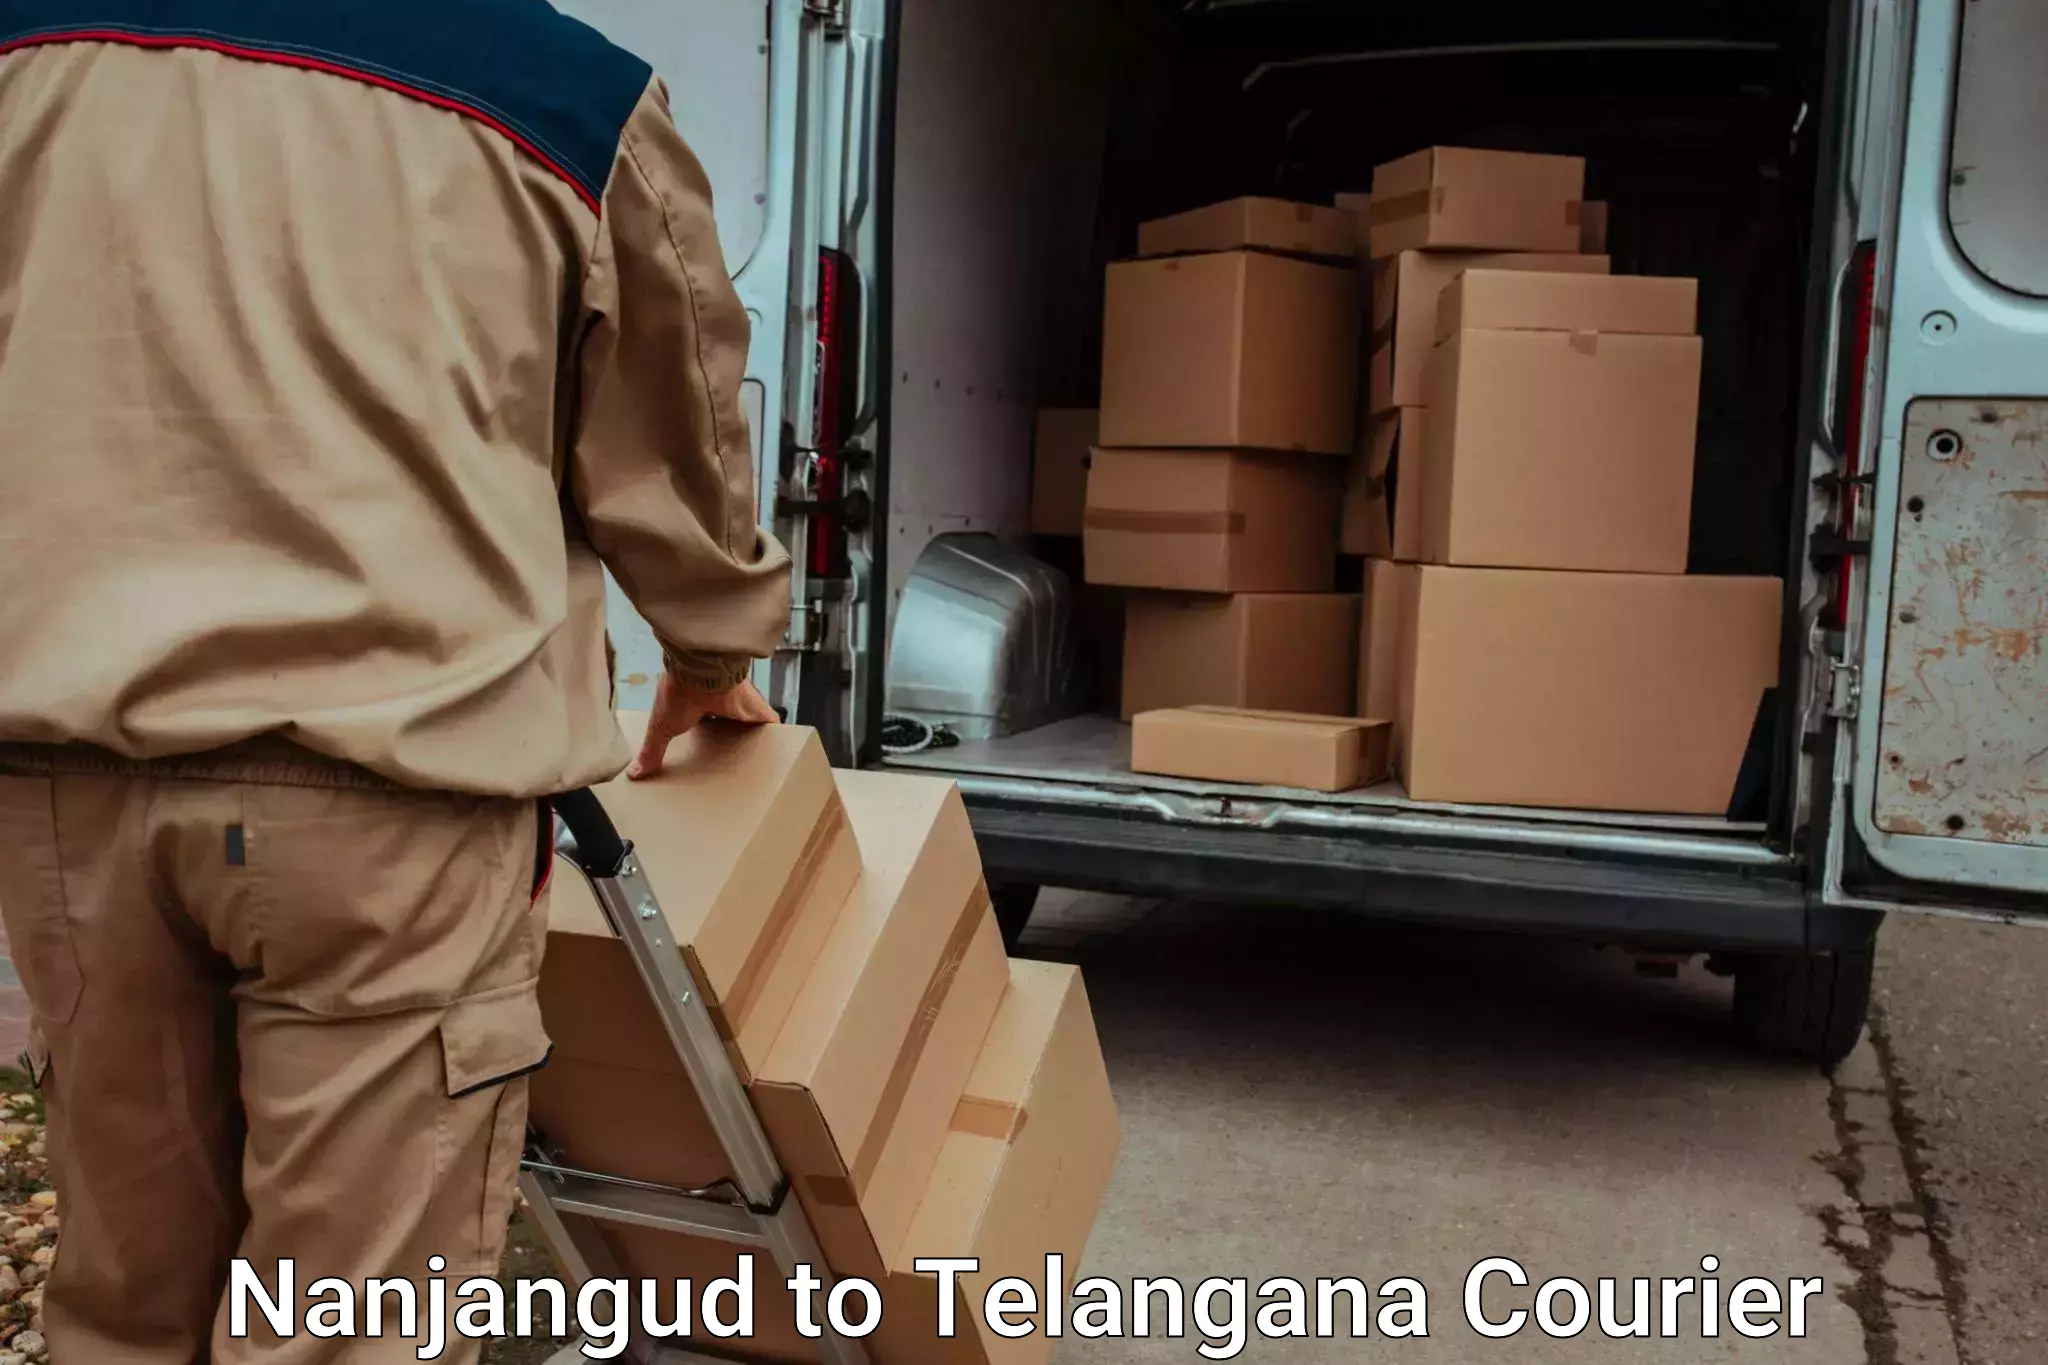 Reliable goods transport in Nanjangud to Manneguda